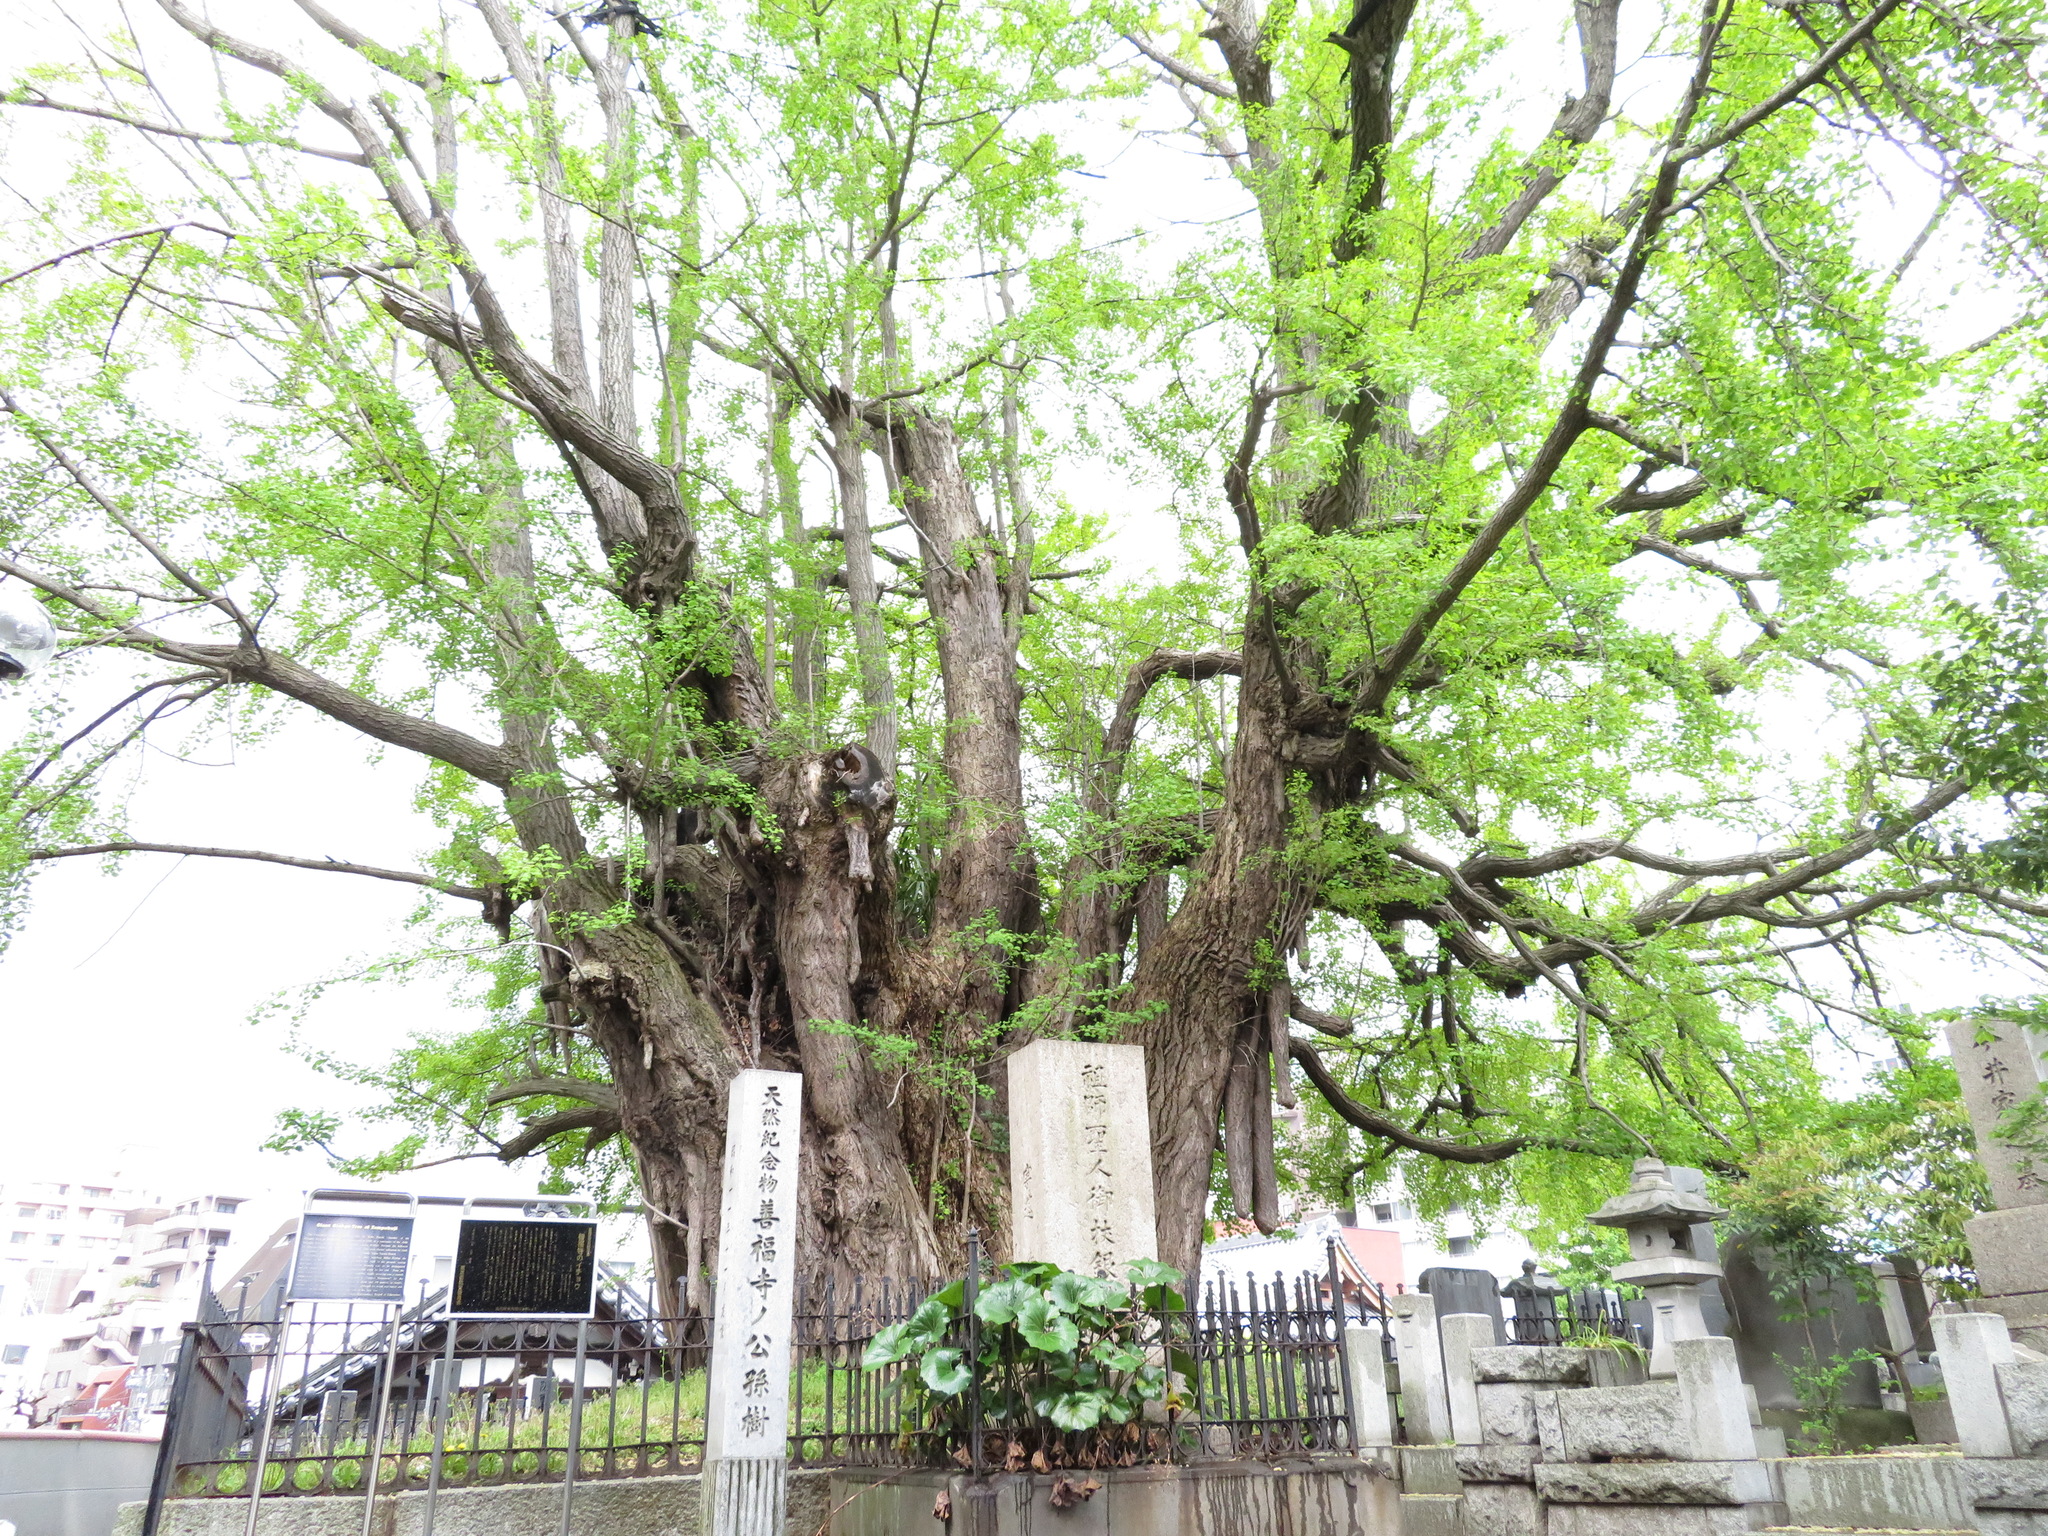 An incredibly large ginkgo tree with a complex trunk structure